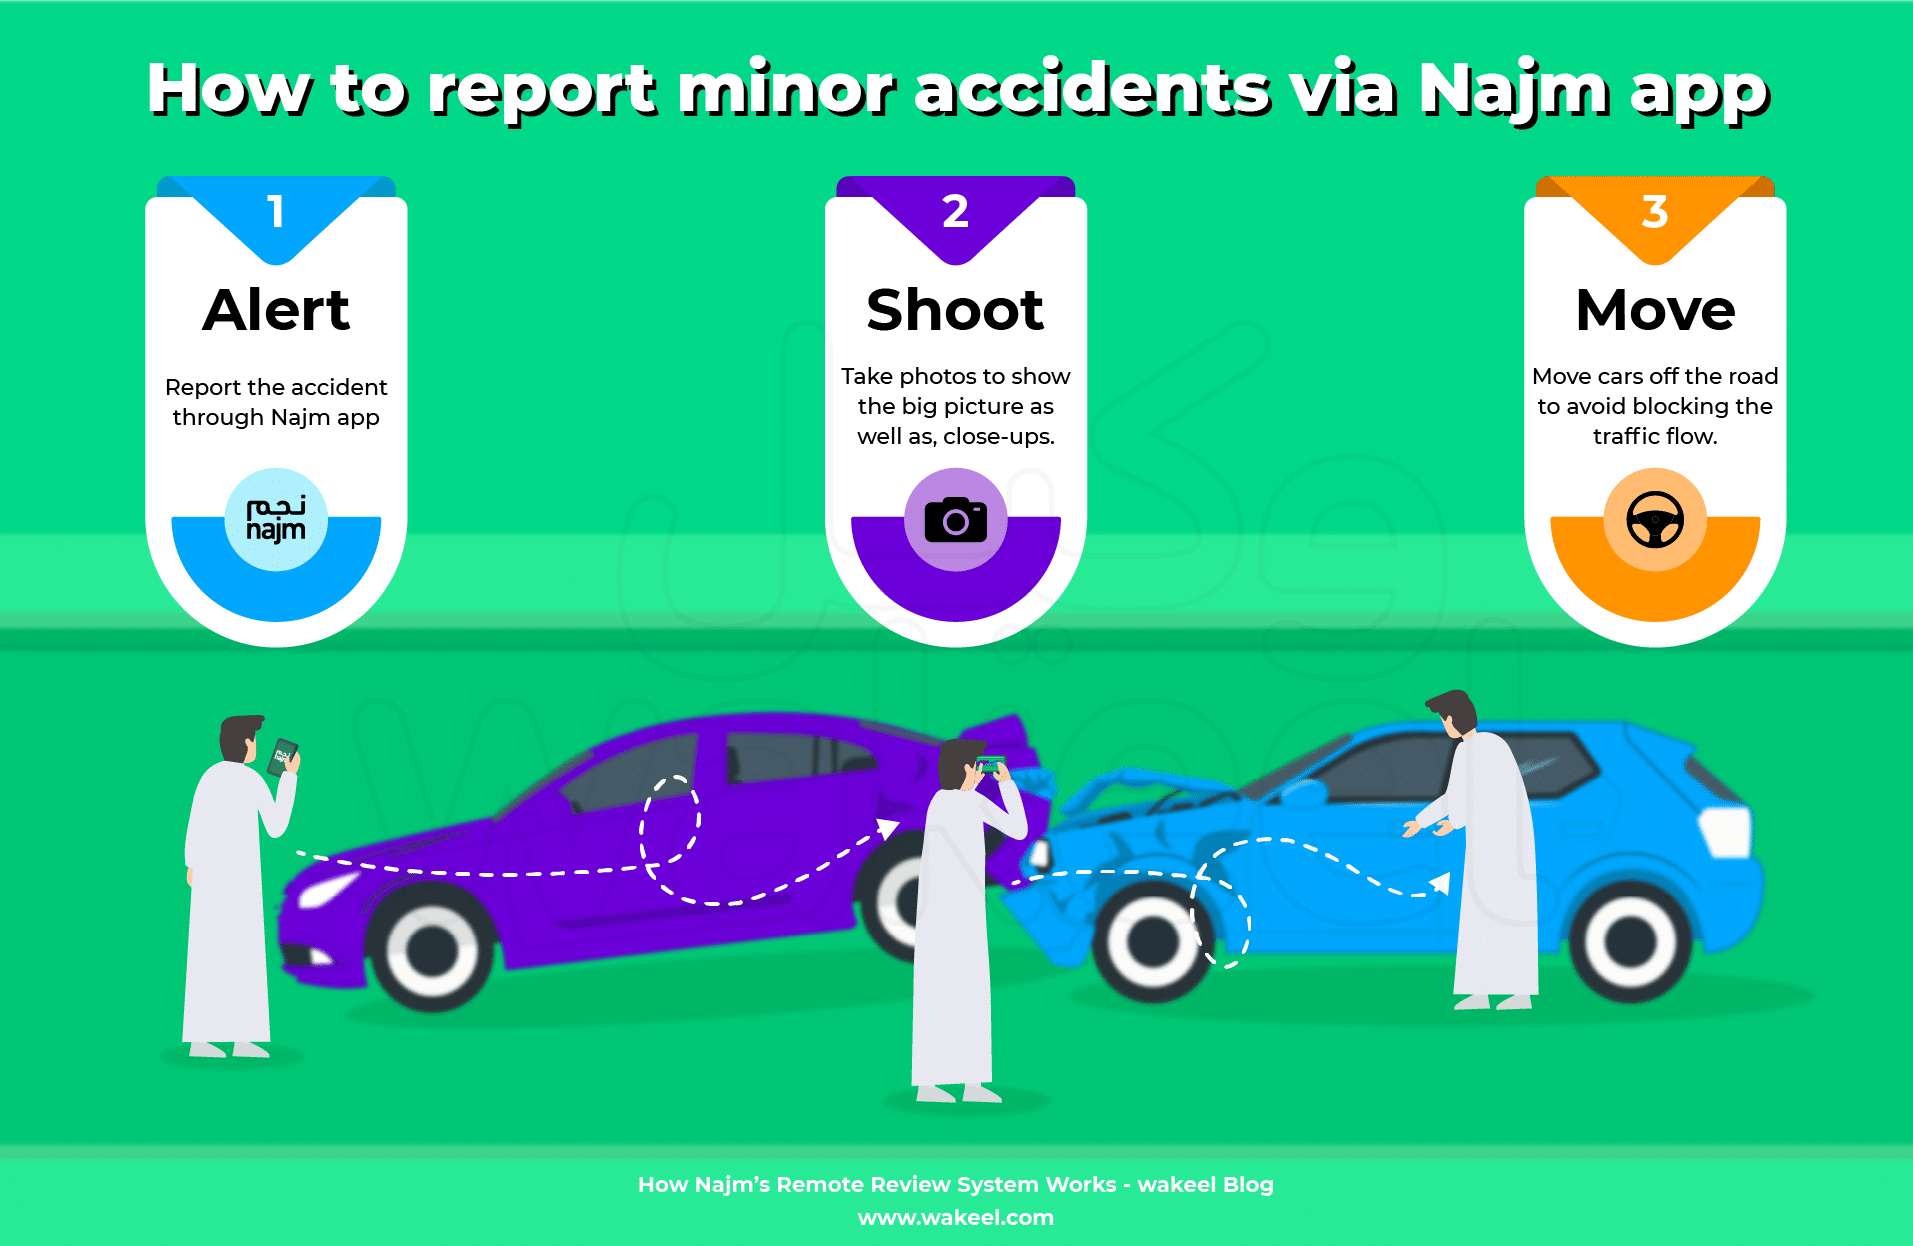 This remote review system enables all customers to report the accident and complete self-services through the Najm application